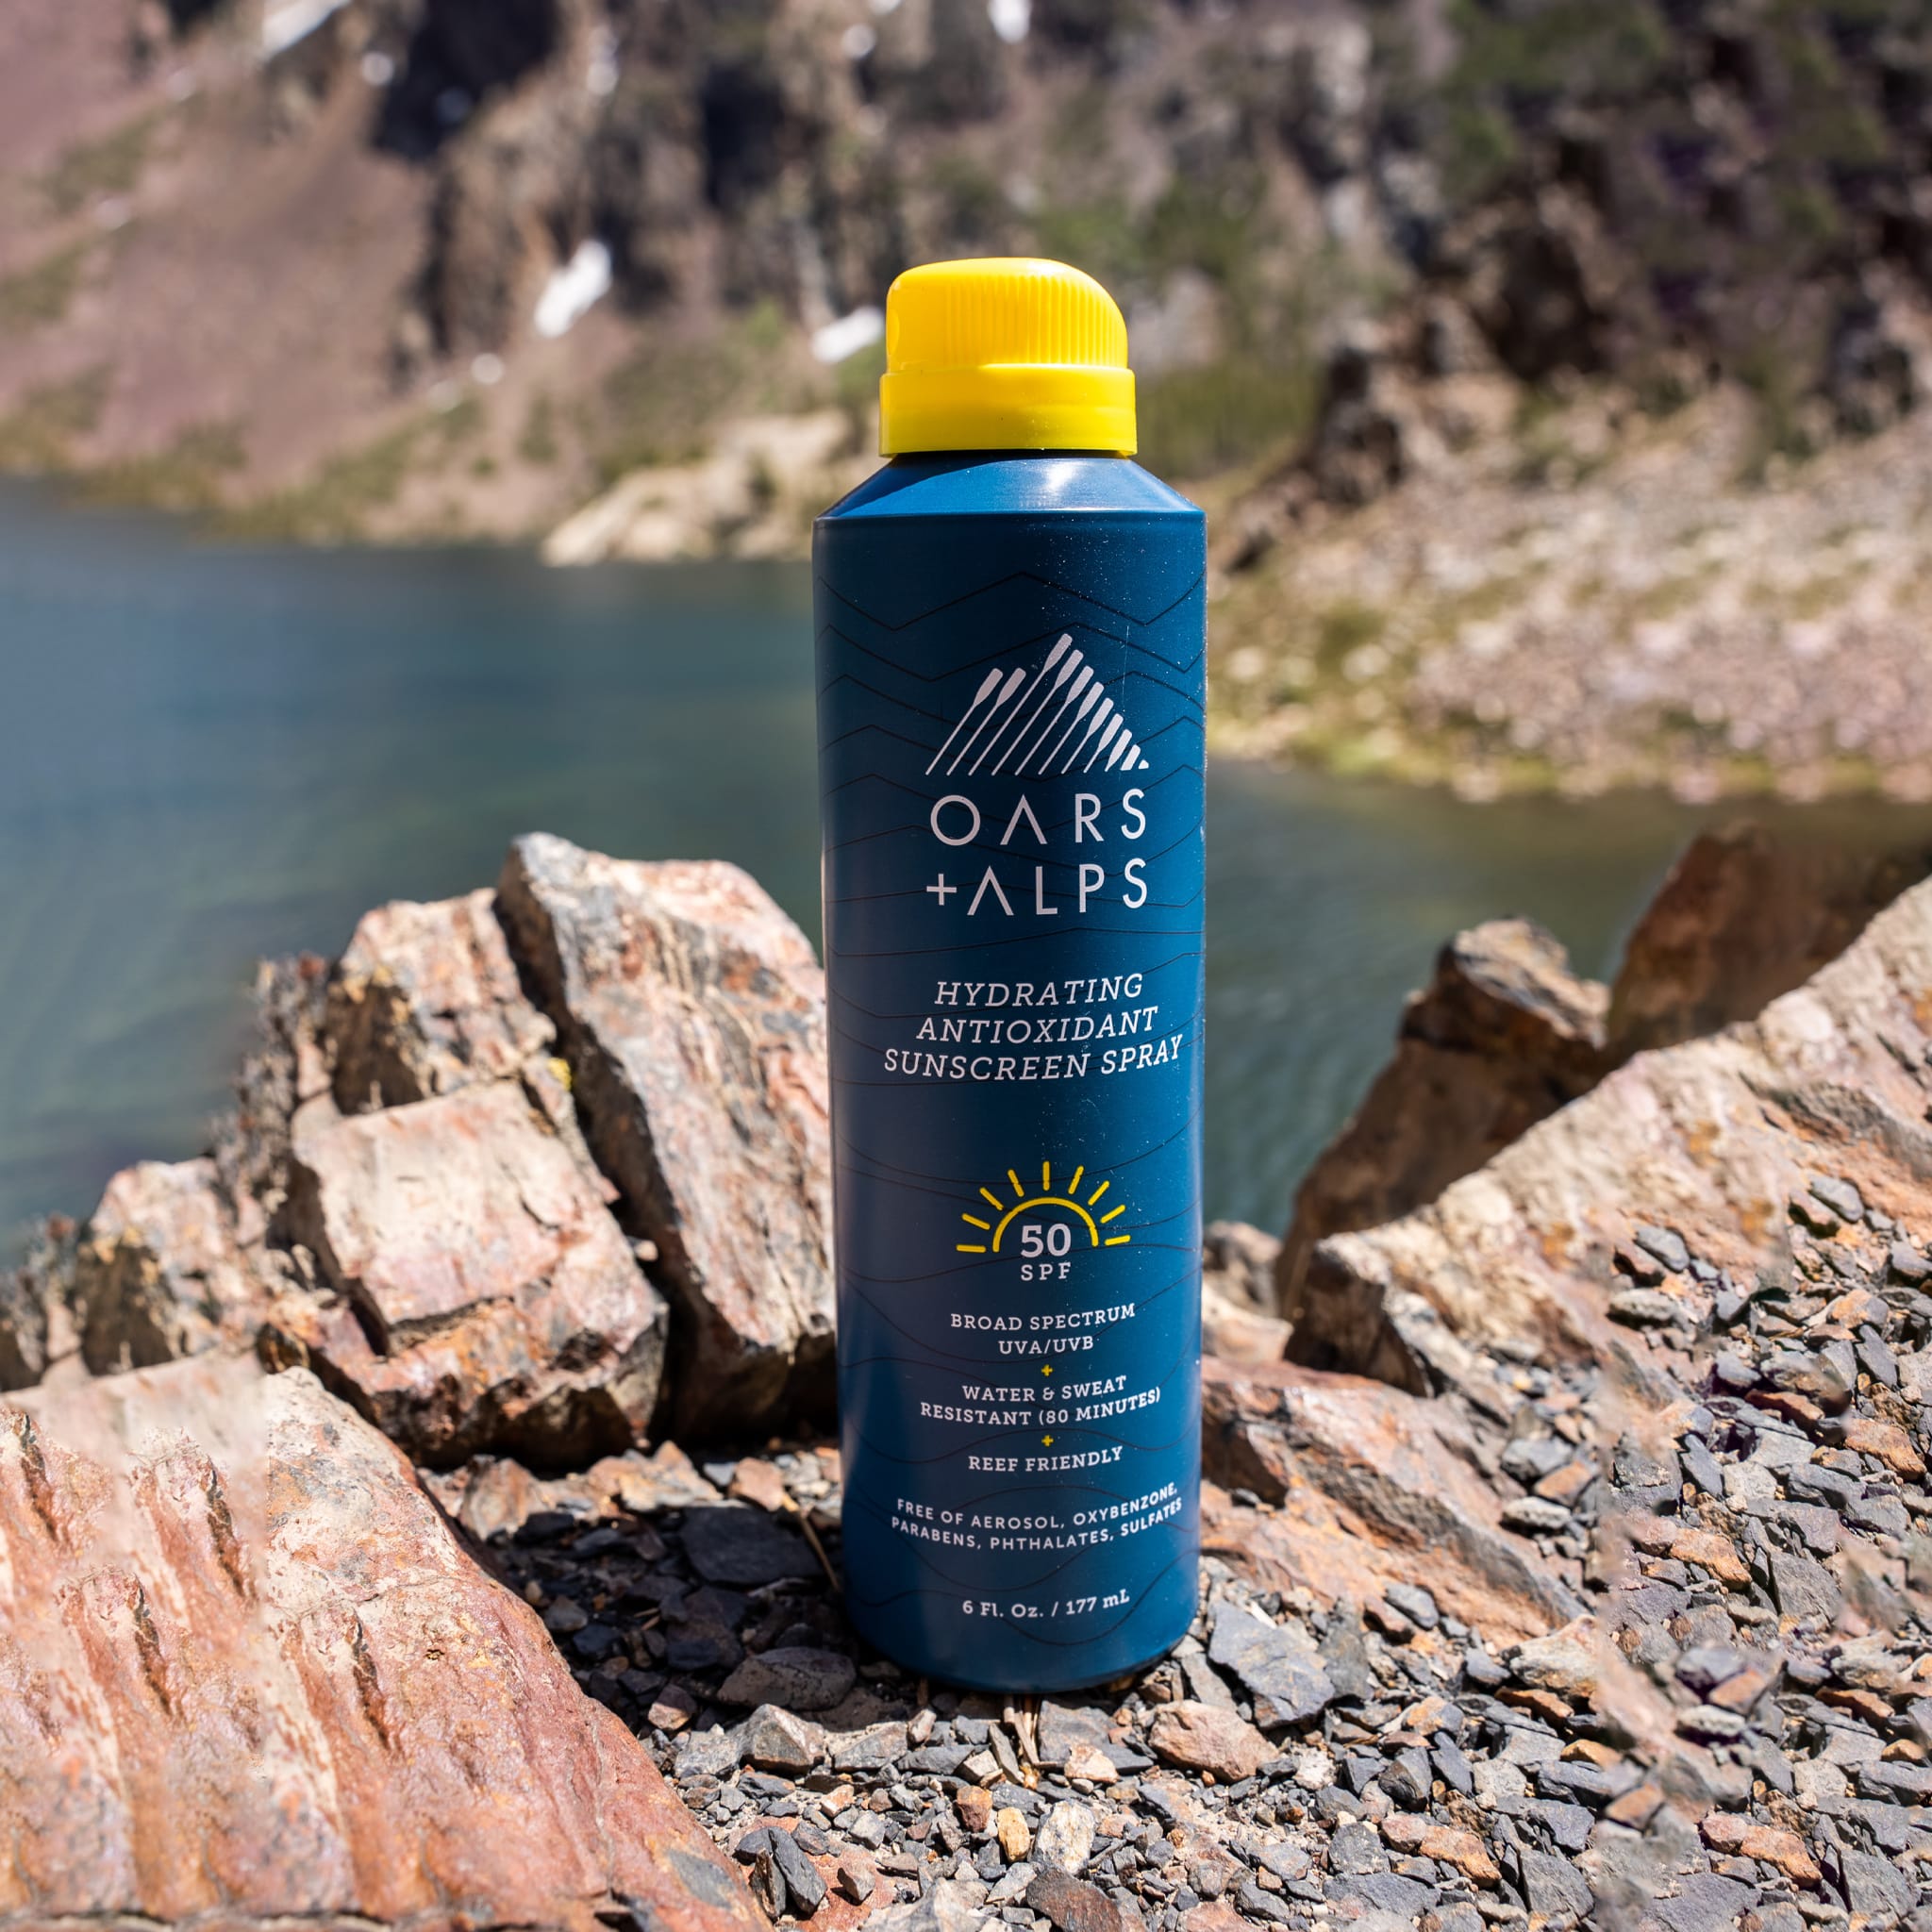 Oars + Alps Hydrating Antioxidant SPF 50 Spray sitting on rock overlooking a body of water 